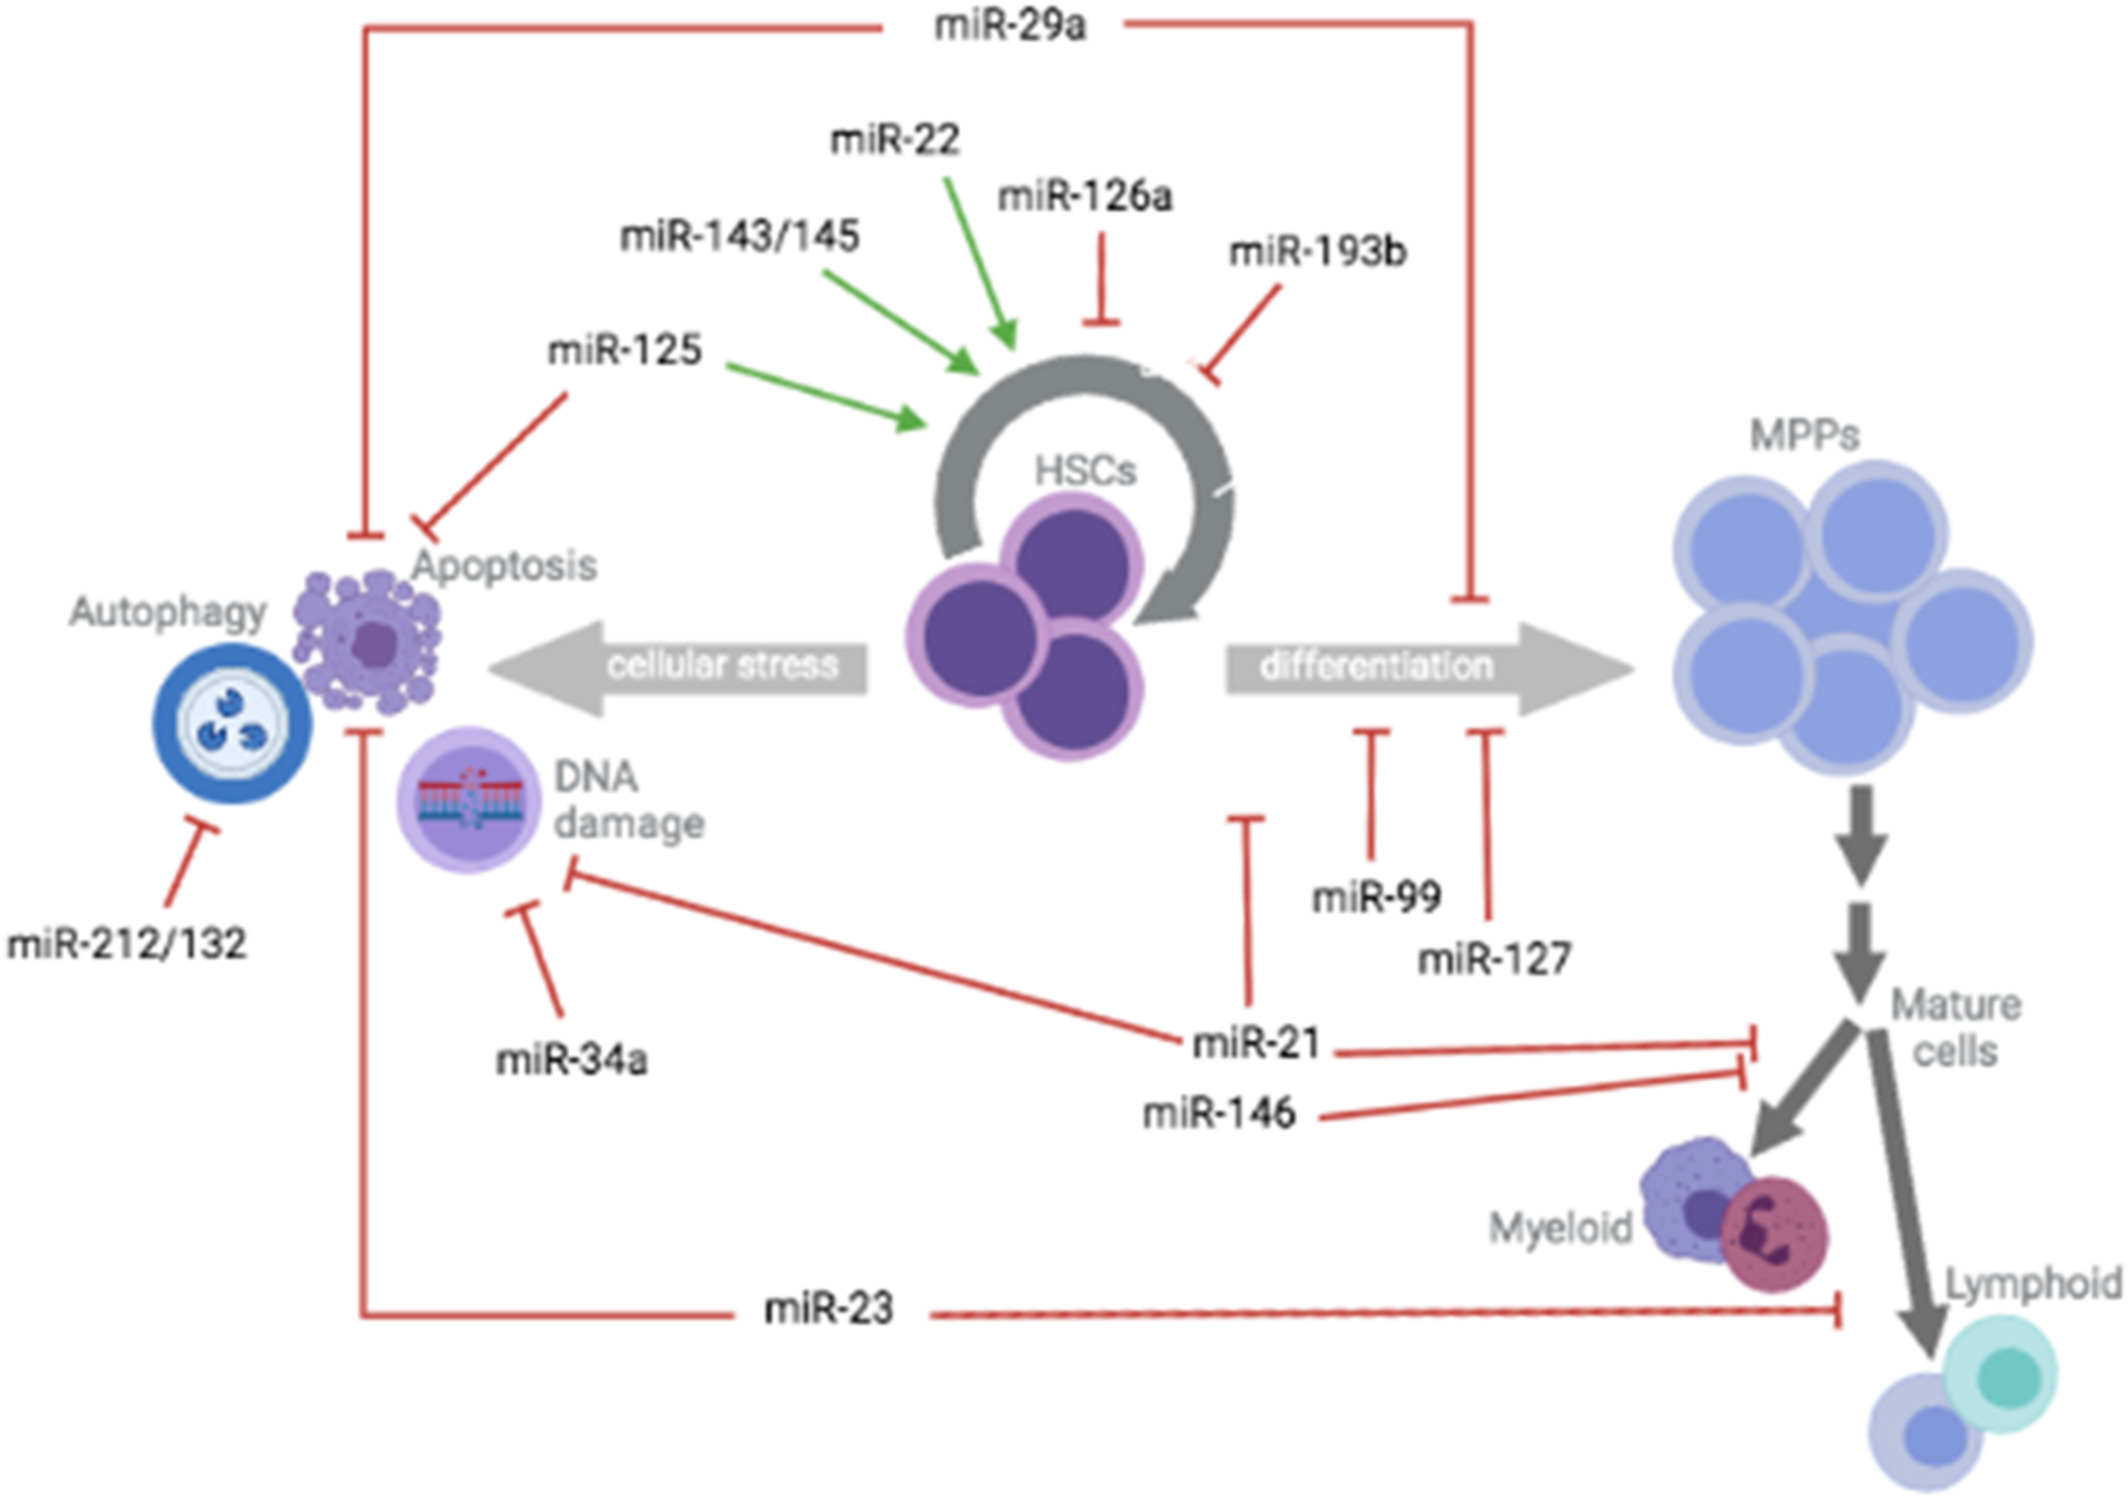 Micro‐RNAs: A safety net to protect hematopoietic stem cell self‐renewal